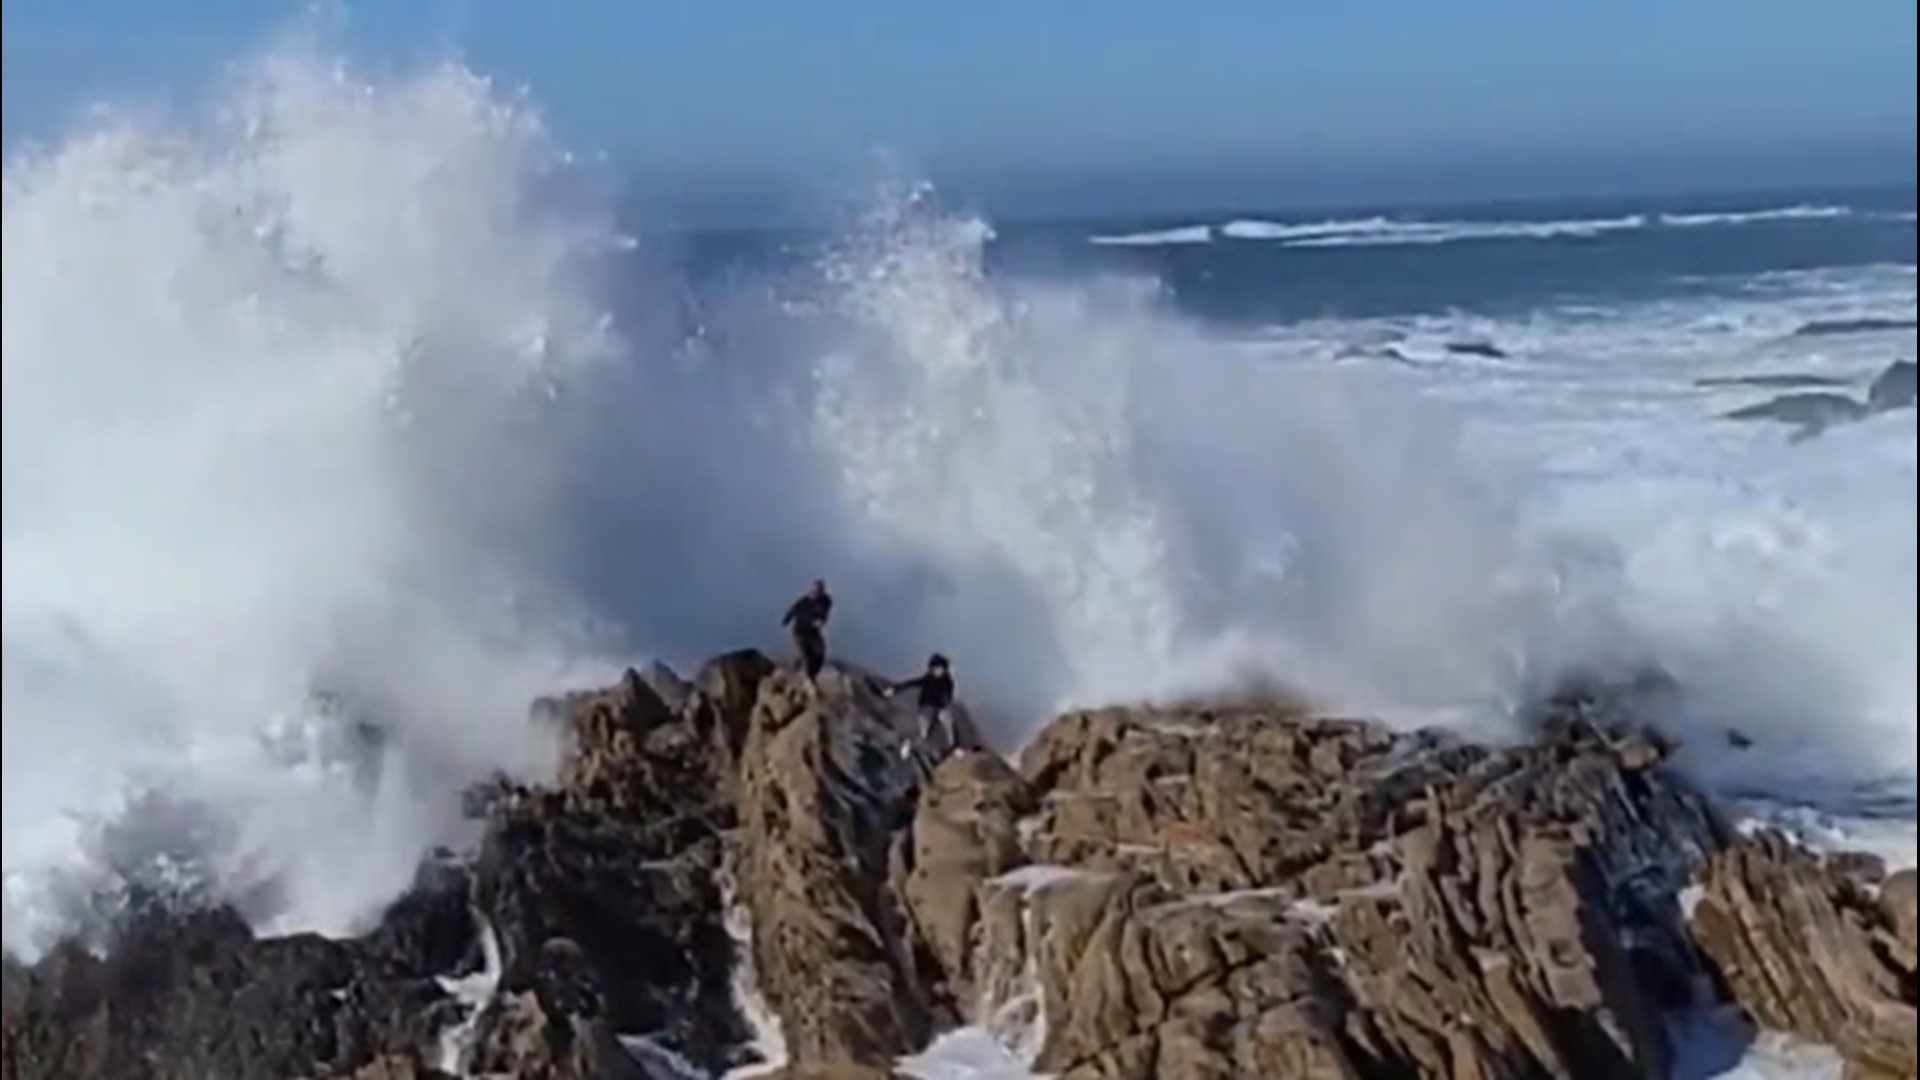 Large waves crashed the coast of Point Lobos, California, on Jan. 16, and nearly swept two people away. The National Weather Service warns people to stay off the rocks to avoid this situation.